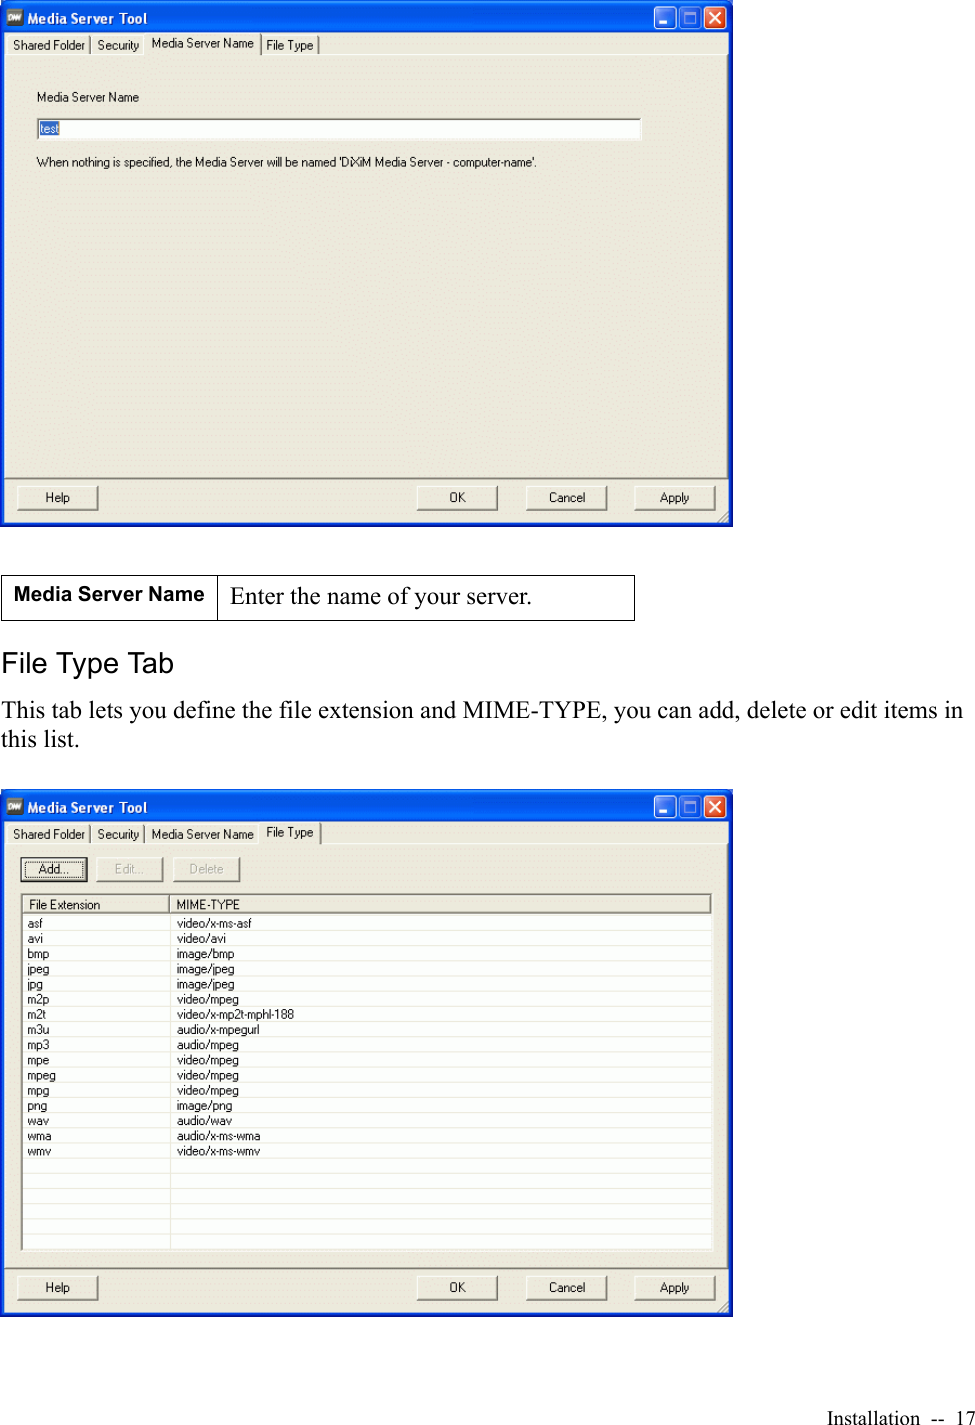 Installation  --  17File Type TabThis tab lets you define the file extension and MIME-TYPE, you can add, delete or edit items in this list.Media Server Name Enter the name of your server.